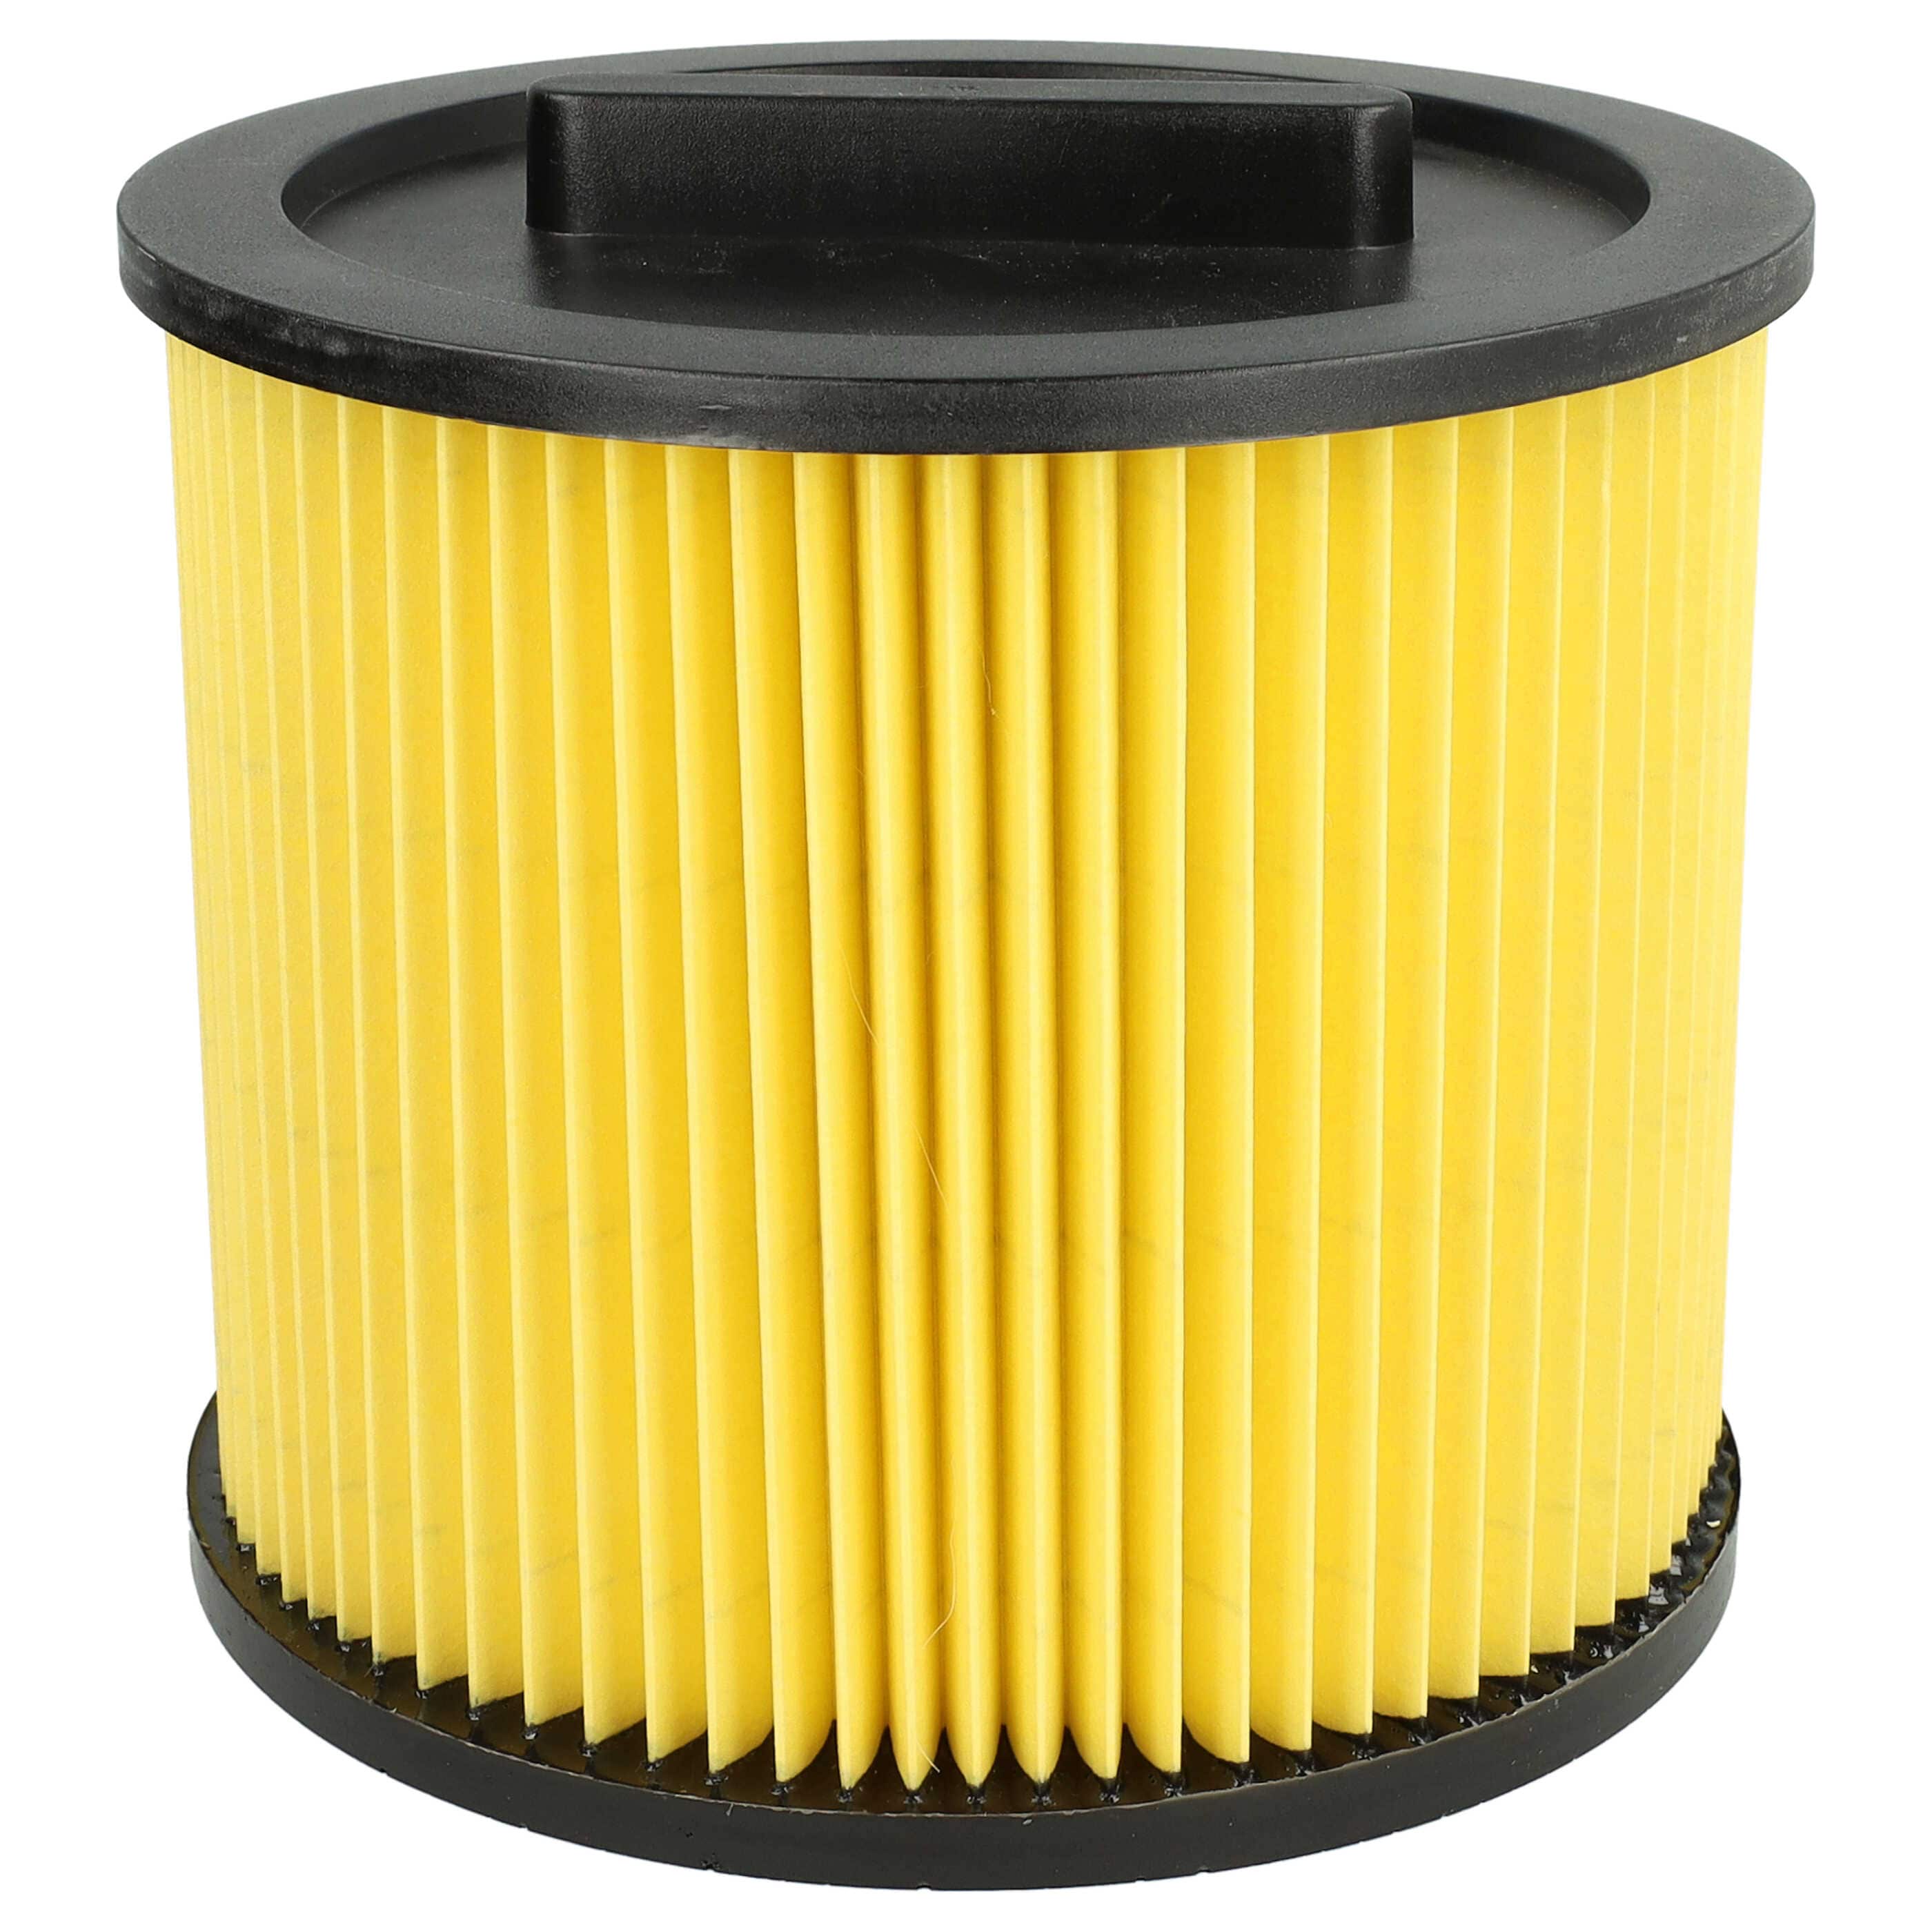 1x cartridge filter replaces Einhell 2351113 for Thomas Vacuum Cleaner, black / yellow